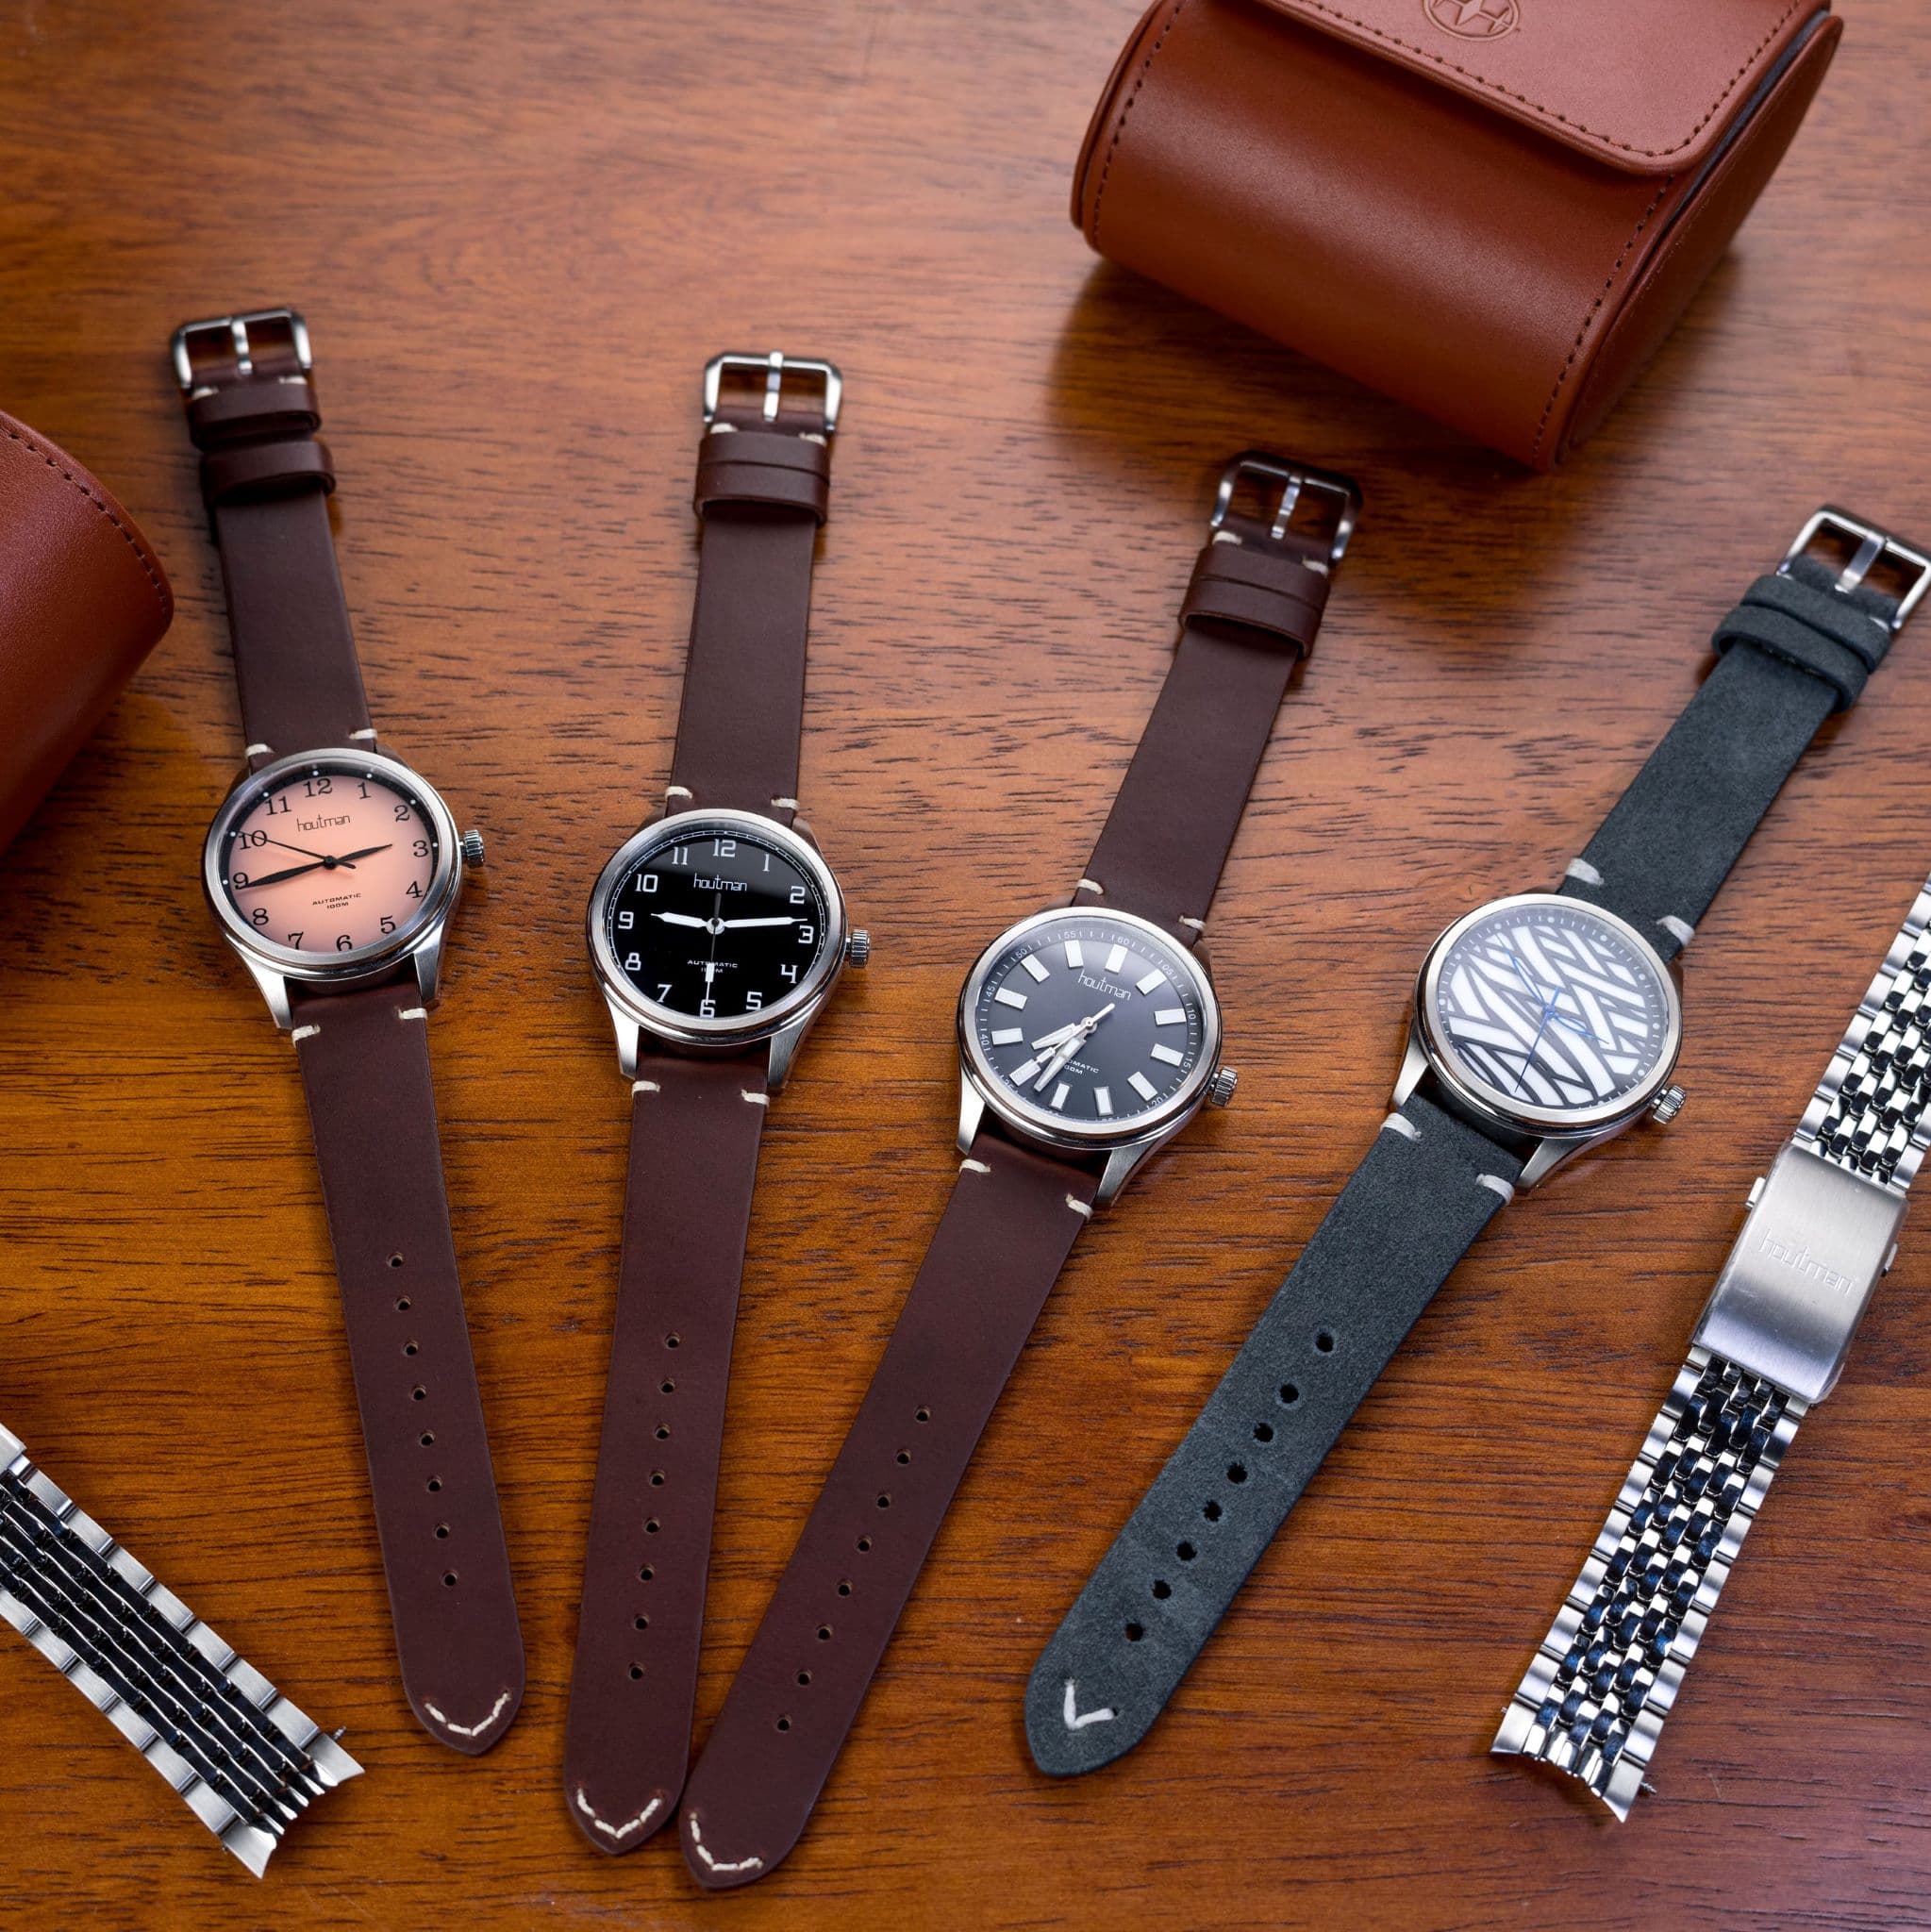 Why Mechanical Watches Still Matter in the Age of Smartwatches